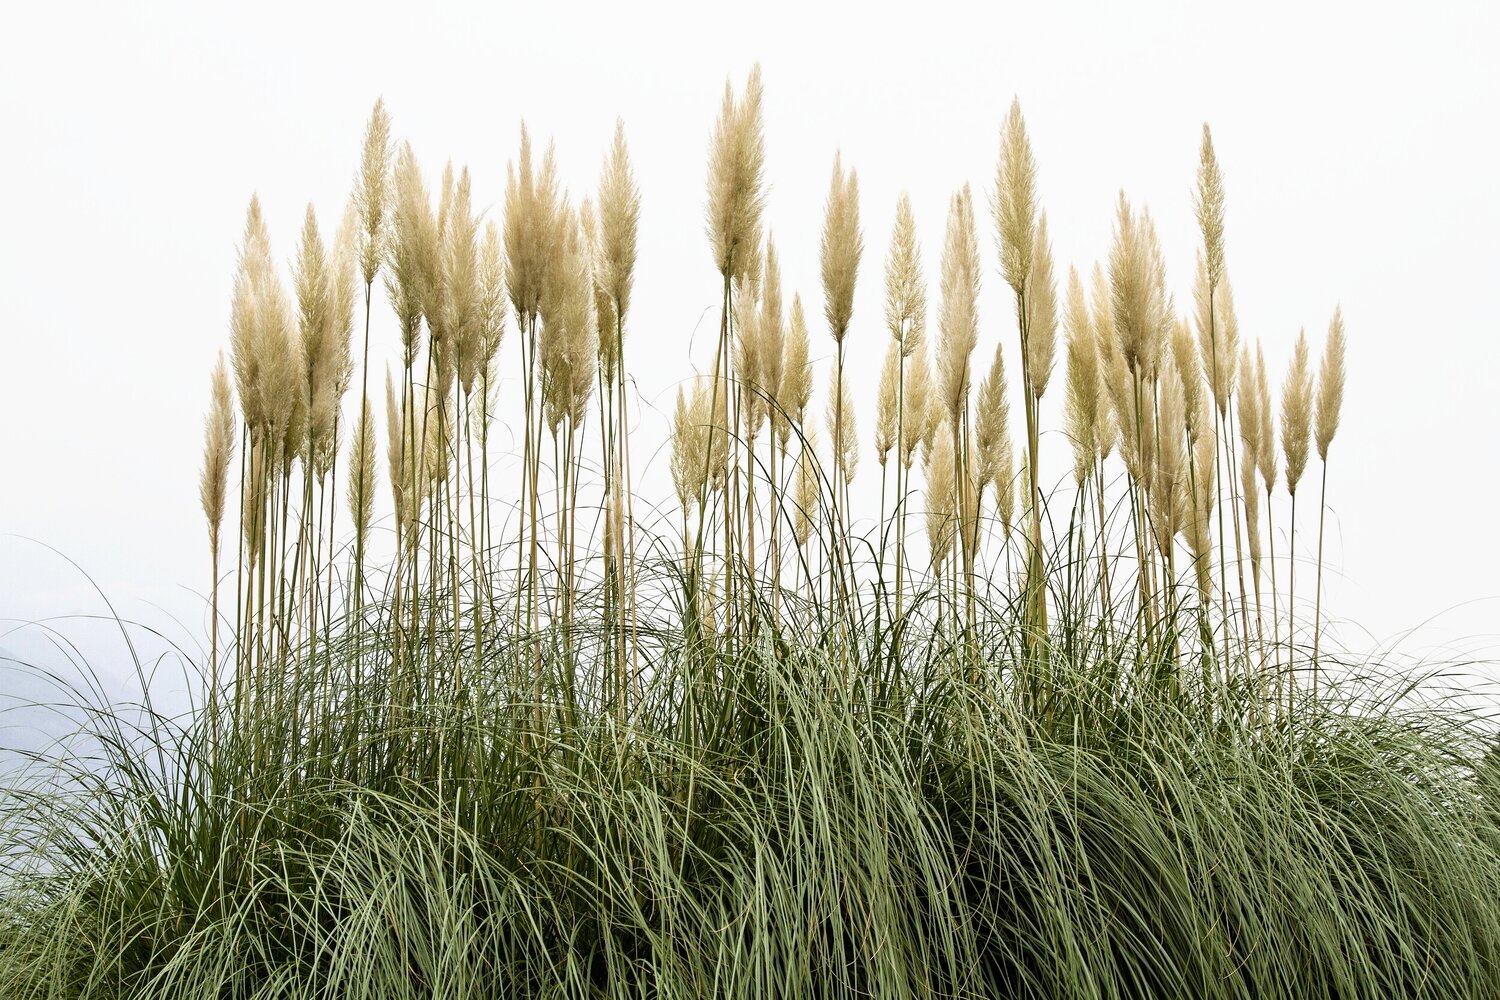 How to repot most grasses